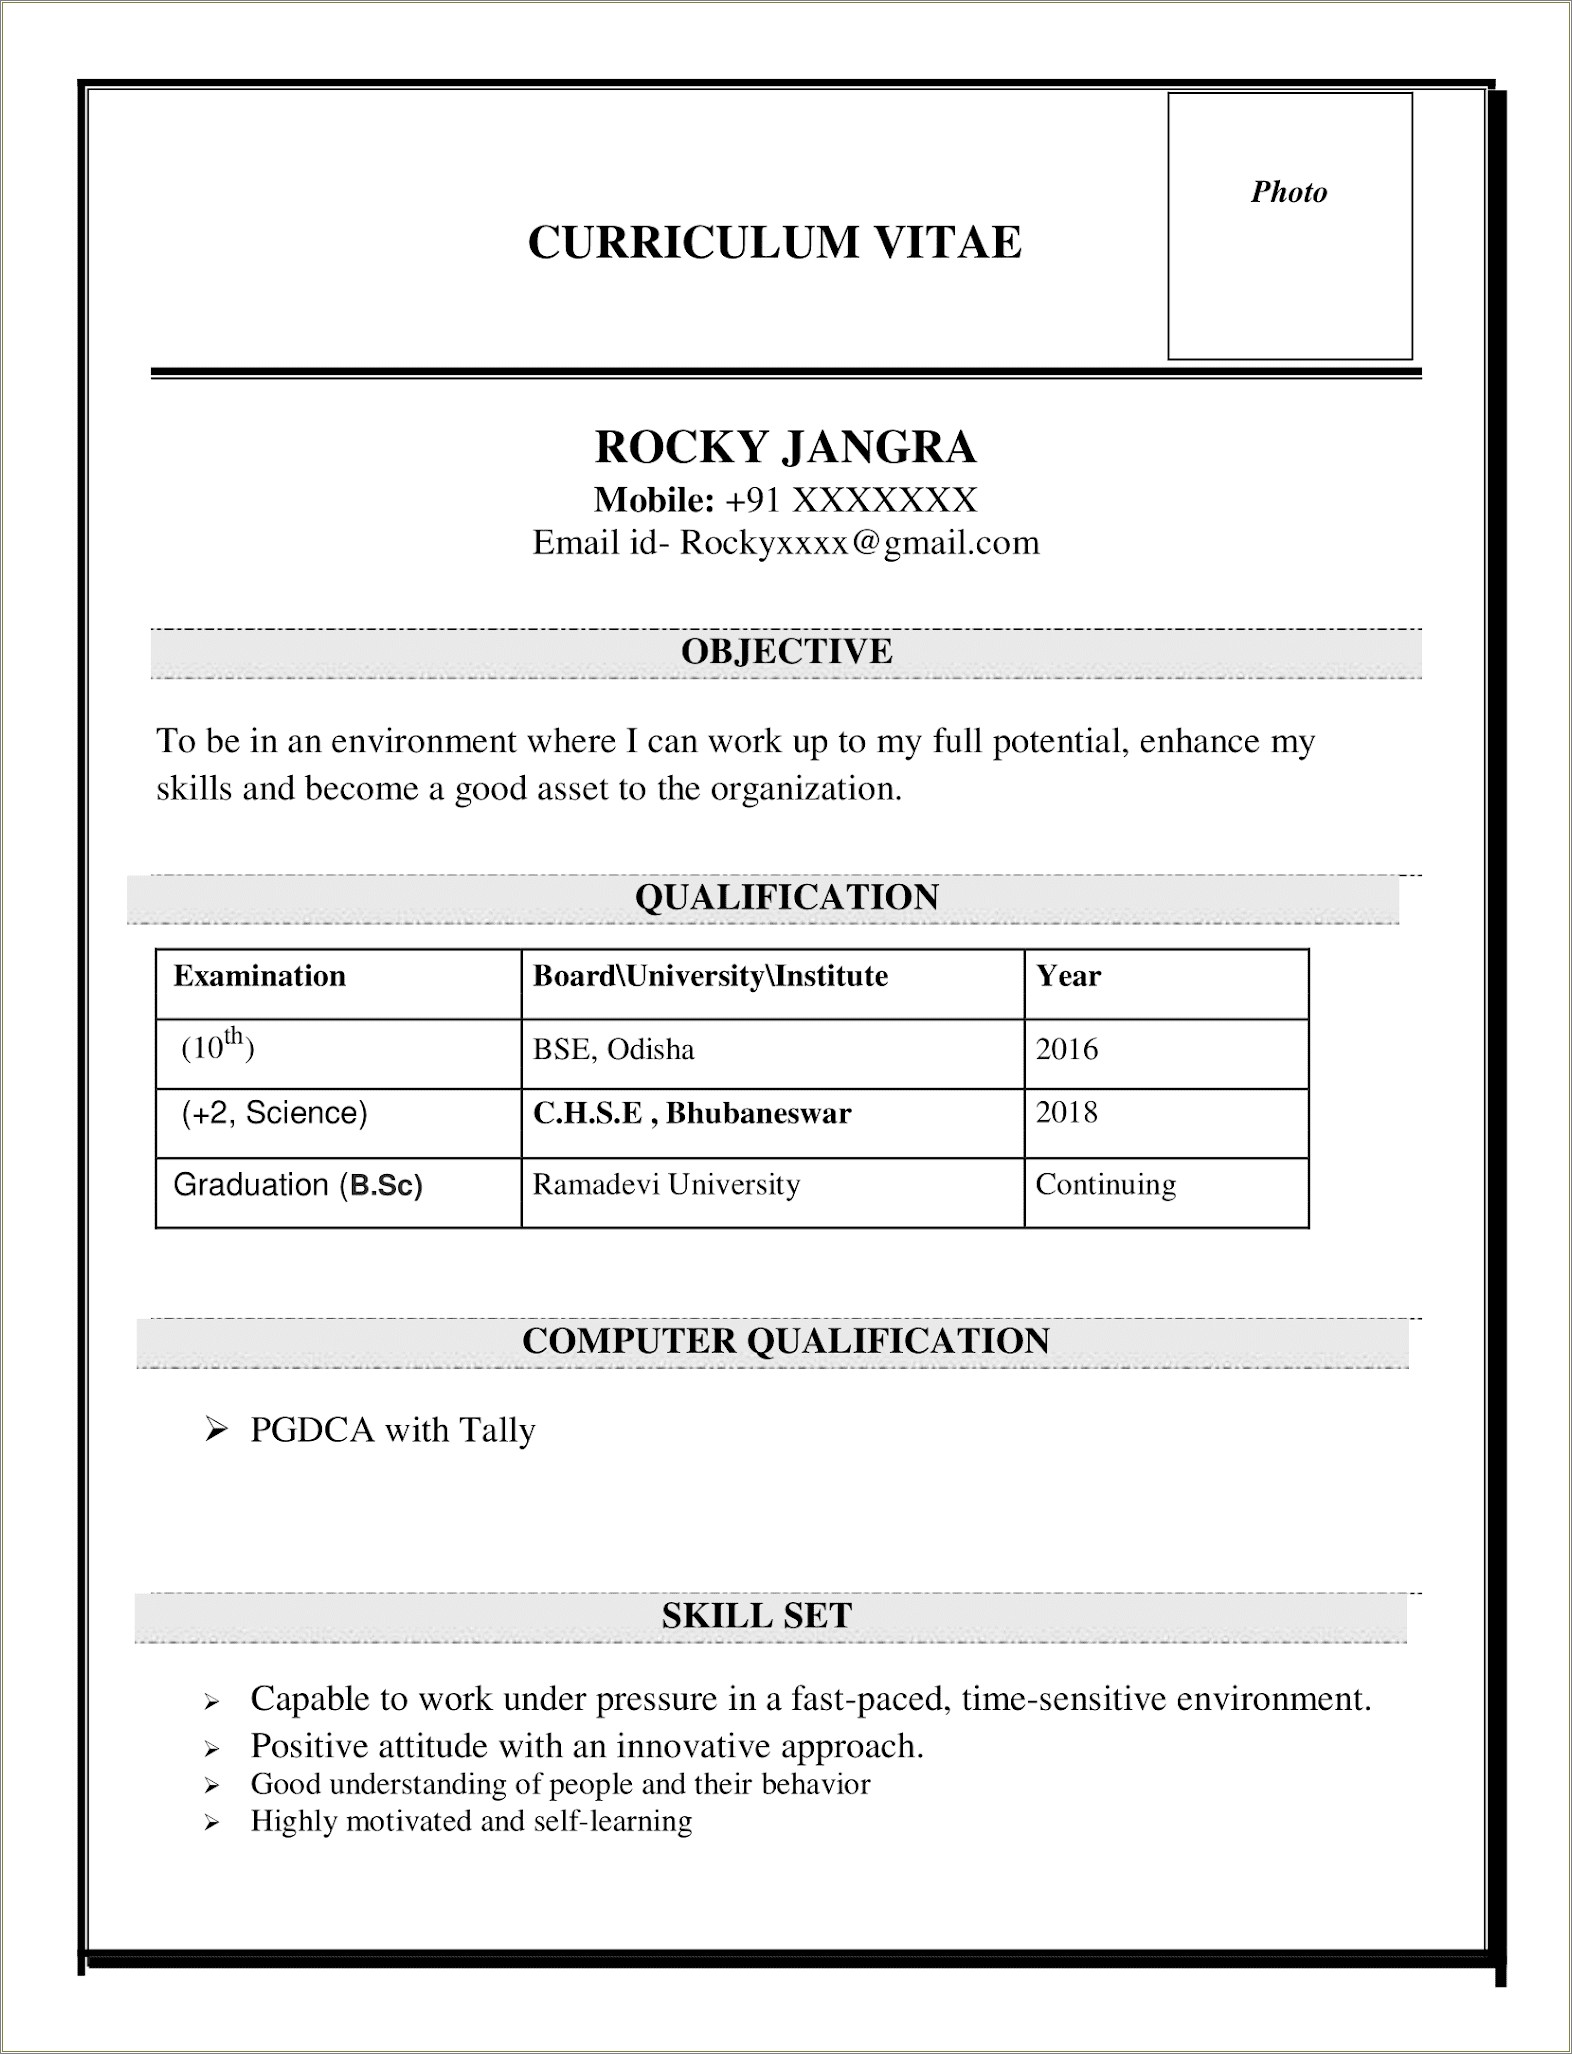 Download Resume Templates For Microsoft Office